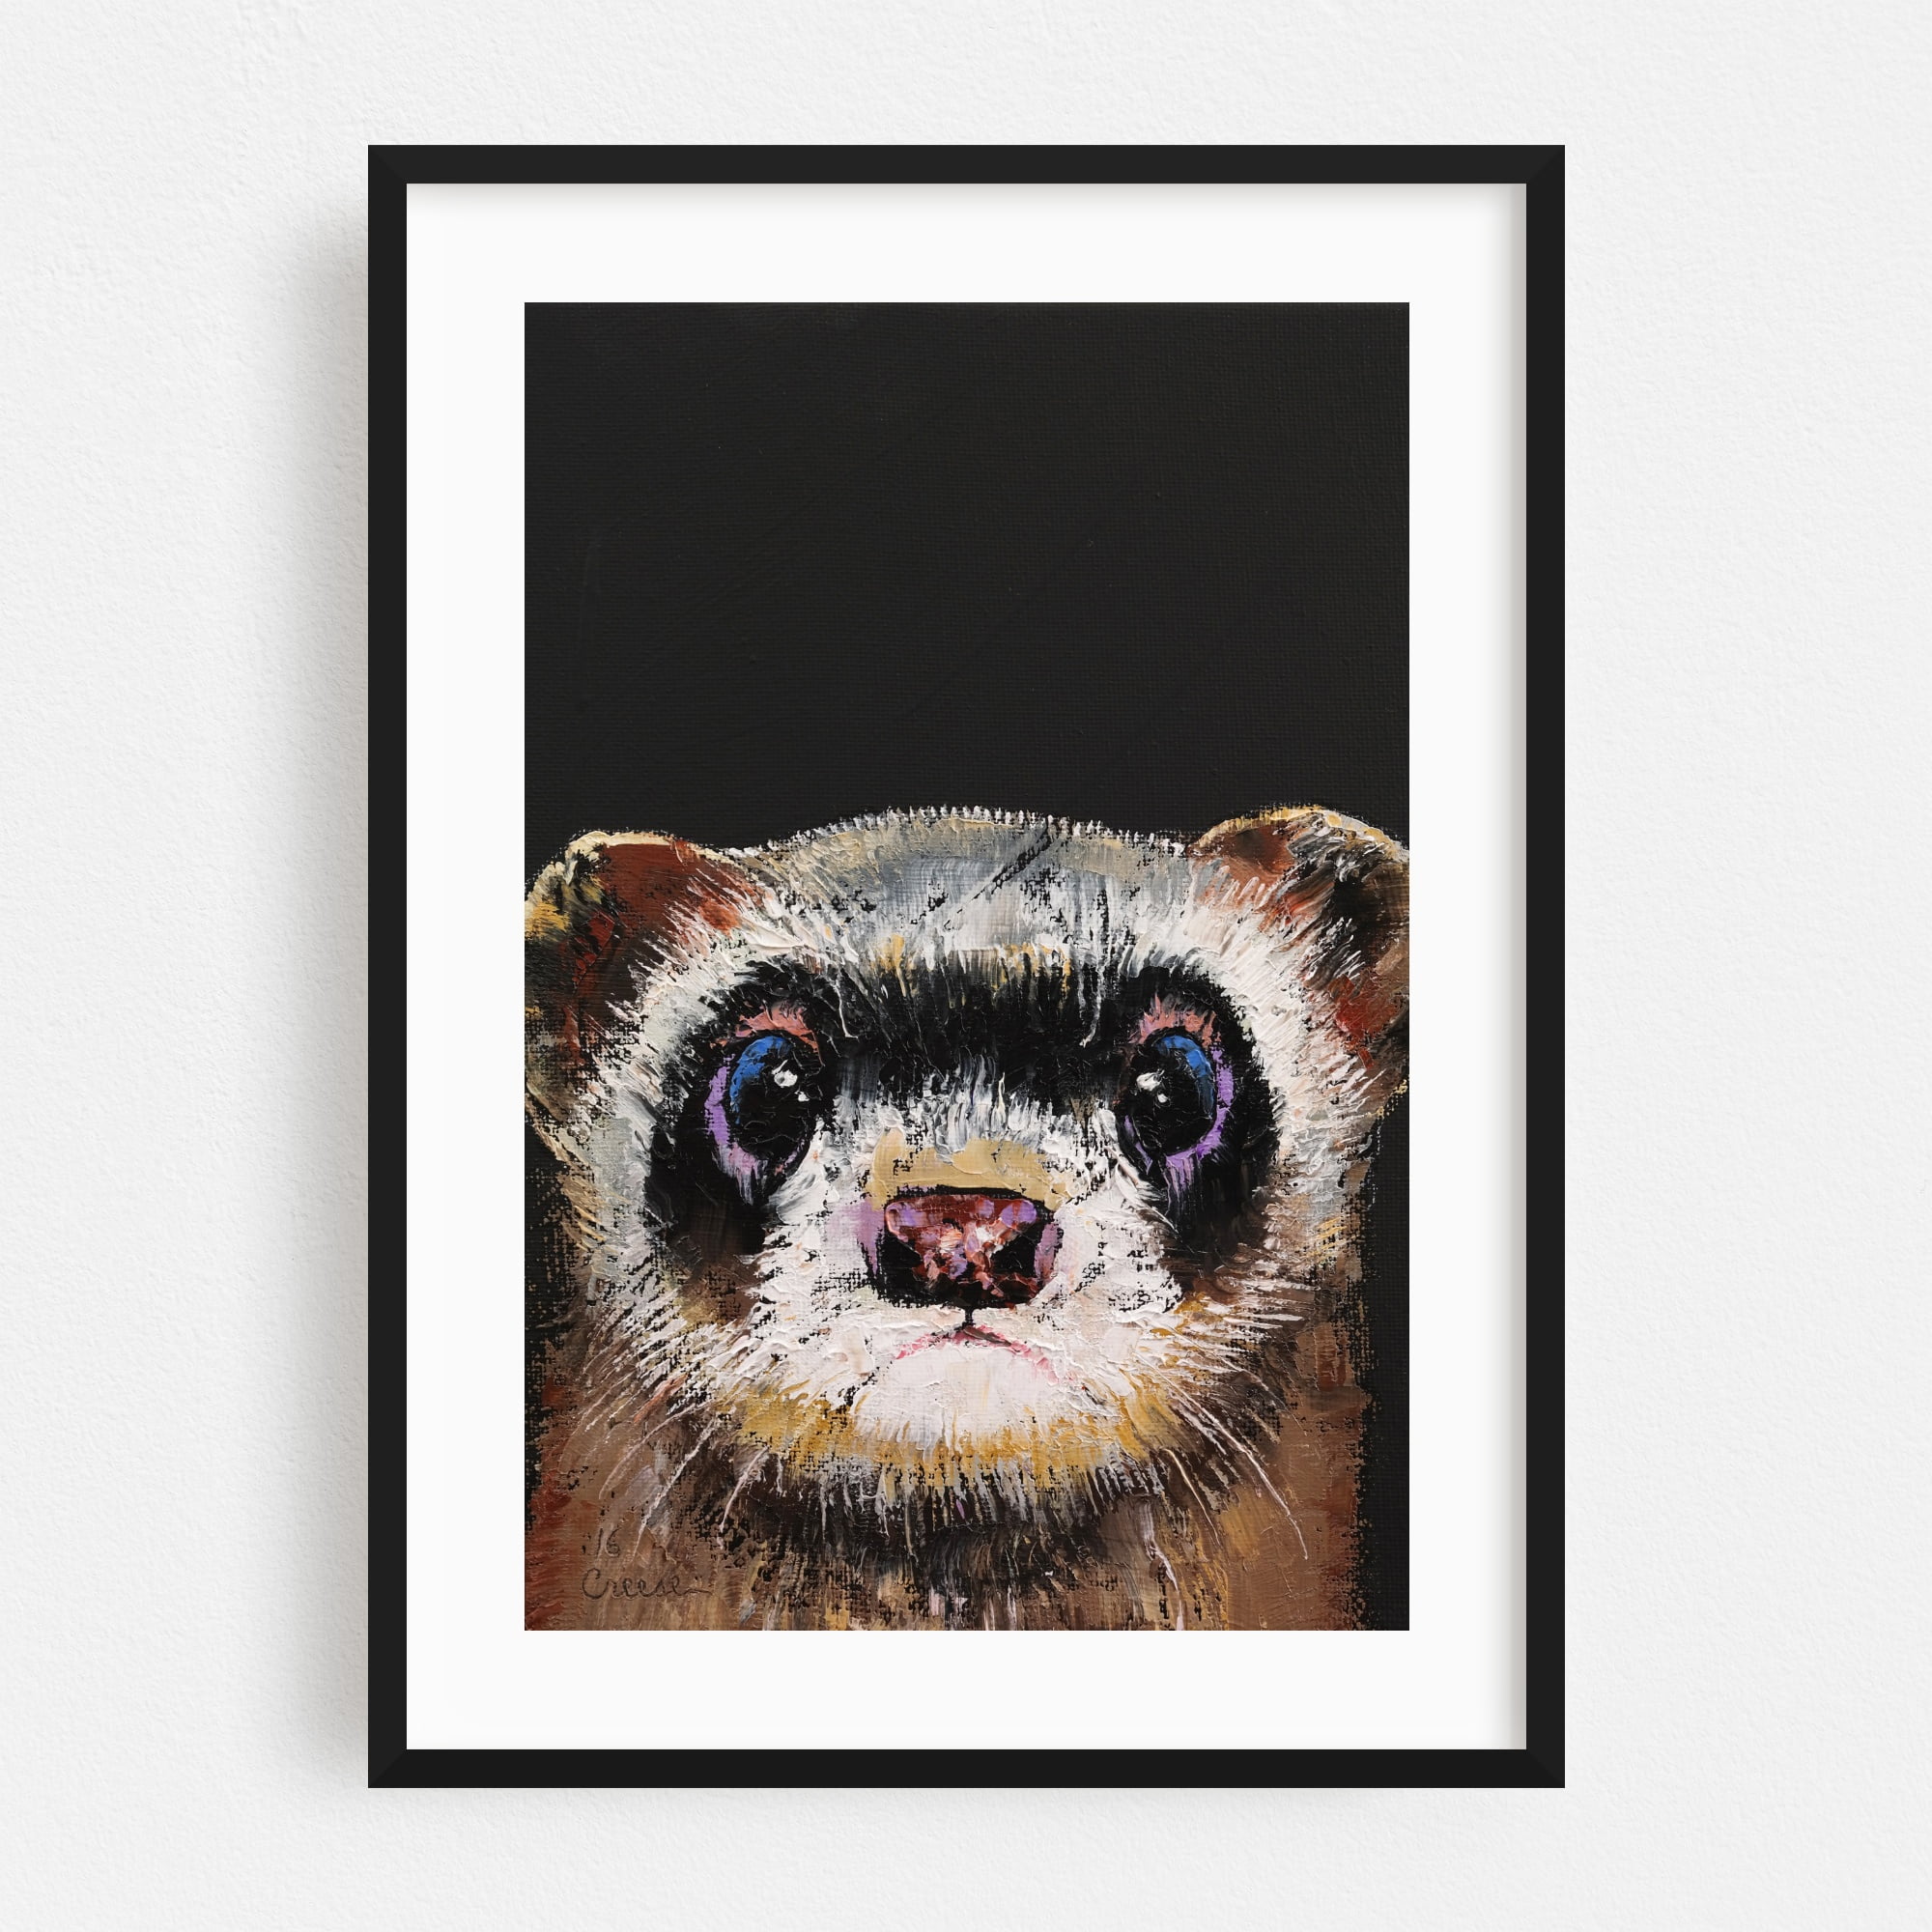 8x10 GLOSSY Photo Picture Ferret Relaxing 8 x 10 